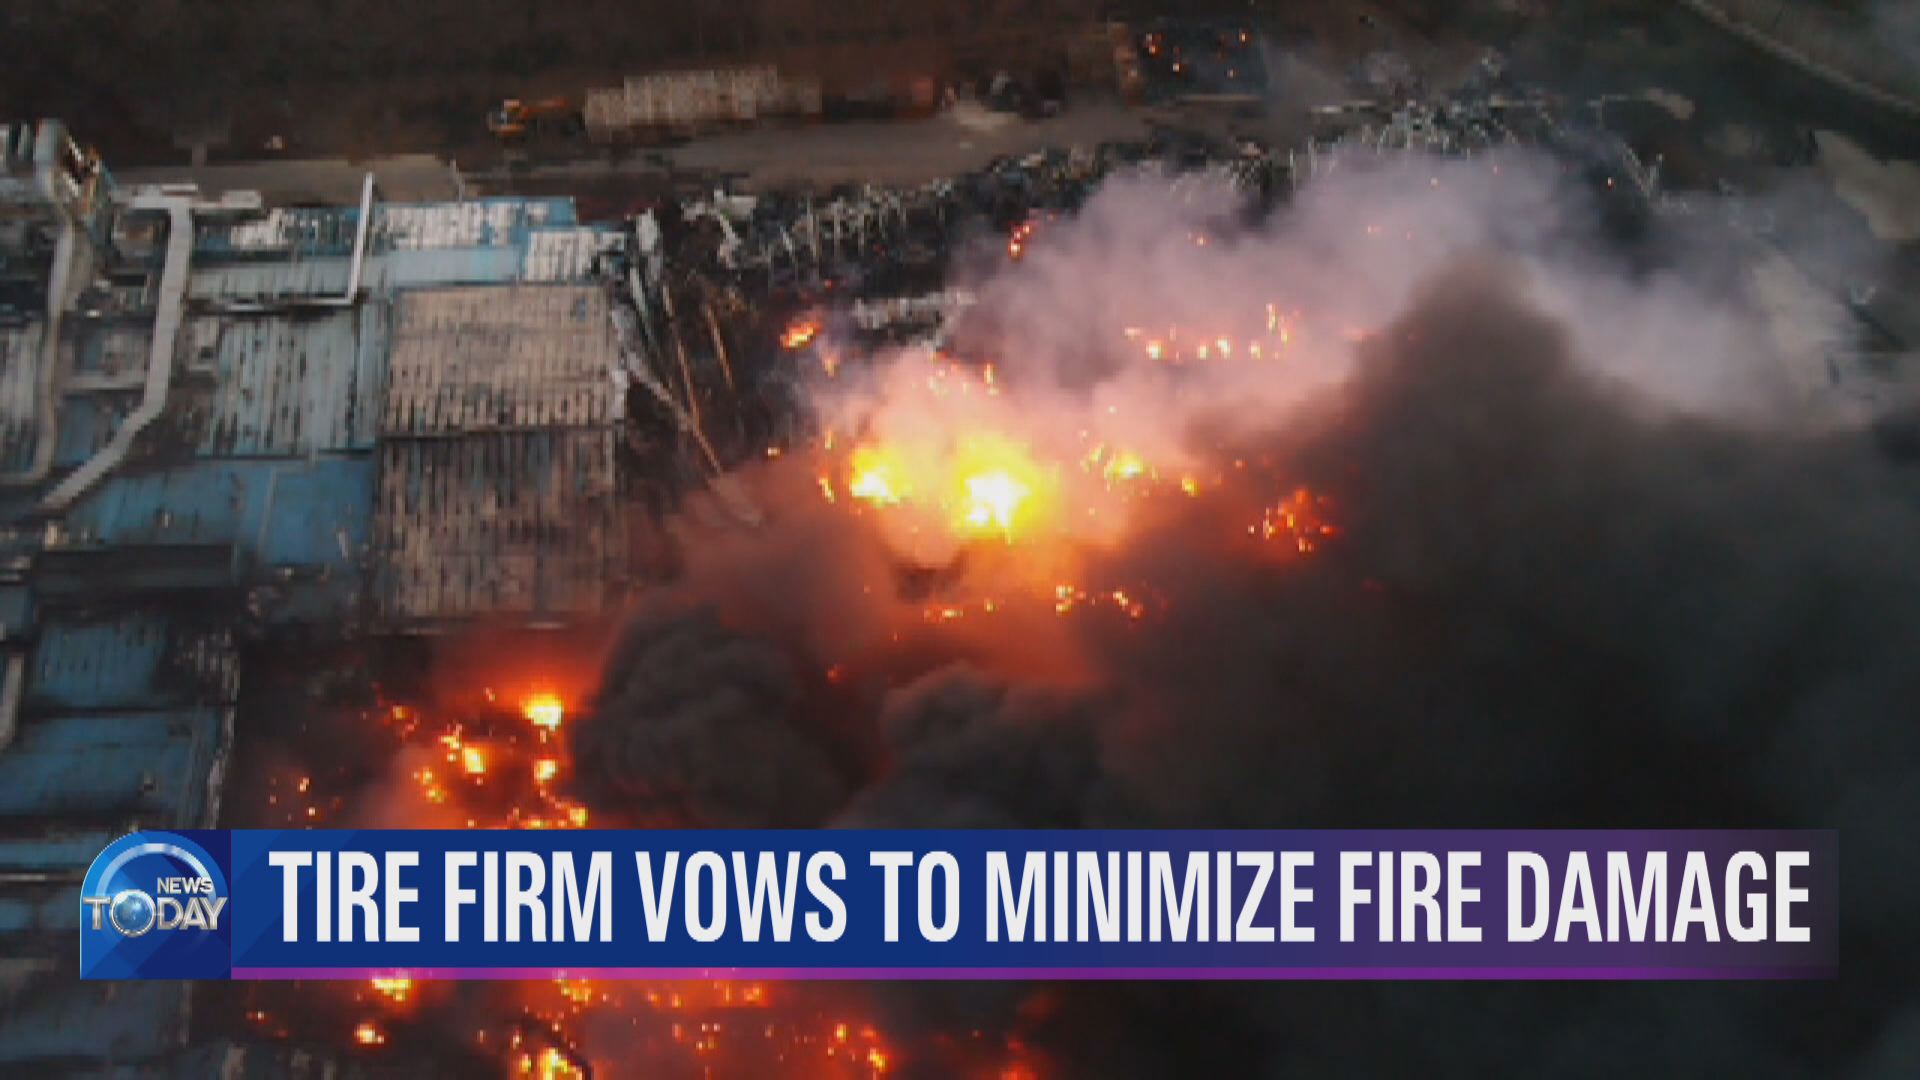 TIRE FIRM VOWS TO MINIMIZE FIRE DAMAGE